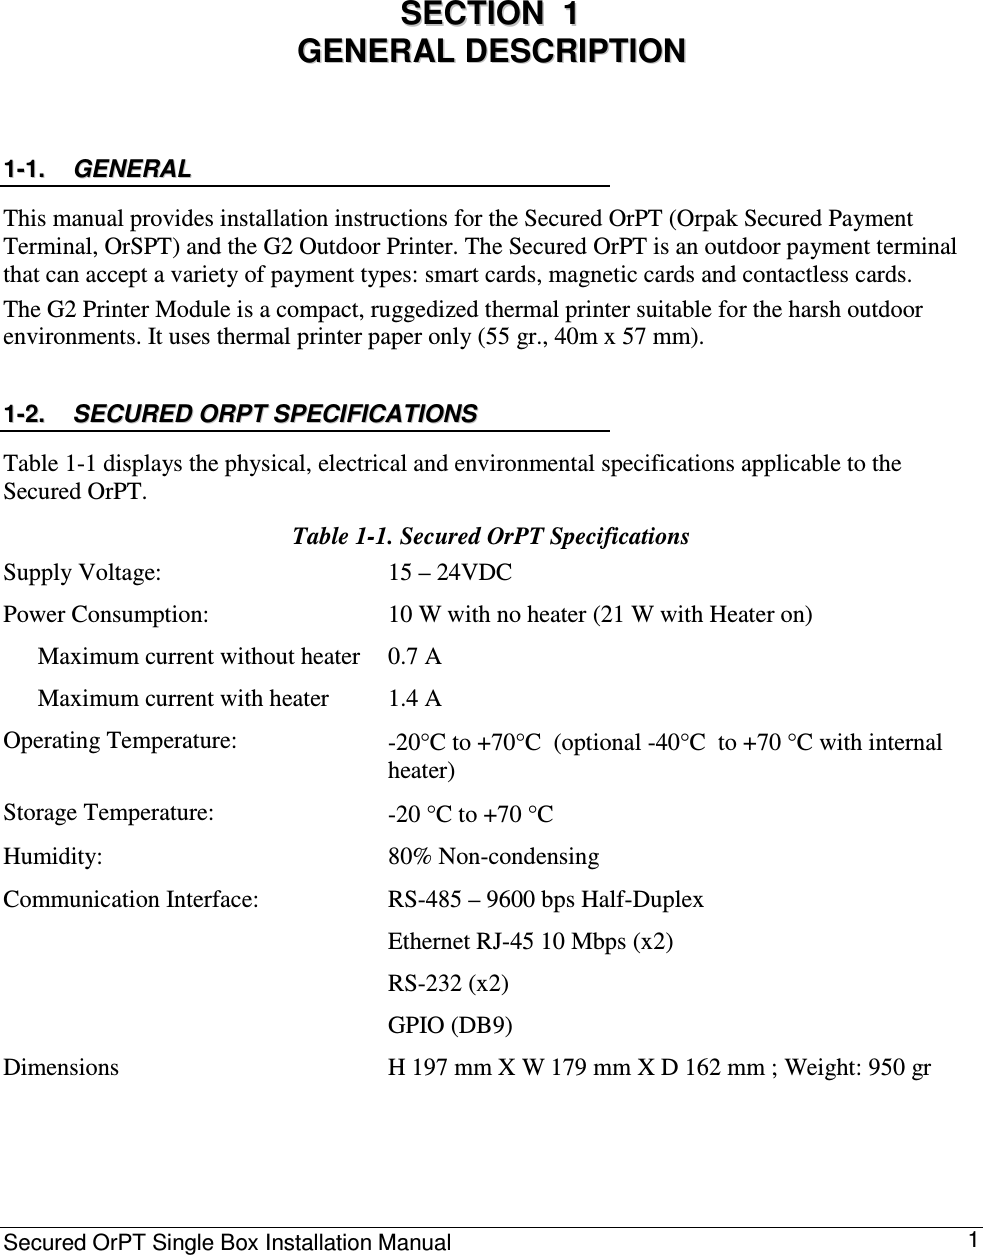 Secured OrPT Single Box Installation Manual      1 0 SSEECCTTIIOONN    11    GGEENNEERRAALL  DDEESSCCRRIIPPTTIIOONN  11--11..  GGEENNEERRAALL    This manual provides installation instructions for the Secured OrPT (Orpak Secured Payment Terminal, OrSPT) and the G2 Outdoor Printer. The Secured OrPT is an outdoor payment terminal that can accept a variety of payment types: smart cards, magnetic cards and contactless cards. The G2 Printer Module is a compact, ruggedized thermal printer suitable for the harsh outdoor environments. It uses thermal printer paper only (55 gr., 40m x 57 mm).  11--22..  SSEECCUURREEDD  OORRPPTT  SSPPEECCIIFFIICCAATTIIOONNSS    Table  1-1 displays the physical, electrical and environmental specifications applicable to the Secured OrPT. Table  1-1. Secured OrPT Specifications Supply Voltage:   15 – 24VDC Power Consumption:    Maximum current without heater   Maximum current with heater 10 W with no heater (21 W with Heater on)  0.7 A 1.4 A Operating Temperature:   -20°C to +70°C  (optional -40°C  to +70 °C with internal heater) Storage Temperature:   -20 °C to +70 °C  Humidity:   80% Non-condensing  Communication Interface:   RS-485 – 9600 bps Half-Duplex  Ethernet RJ-45 10 Mbps (x2)  RS-232 (x2)  GPIO (DB9)  Dimensions  H 197 mm X W 179 mm X D 162 mm ; Weight: 950 gr  